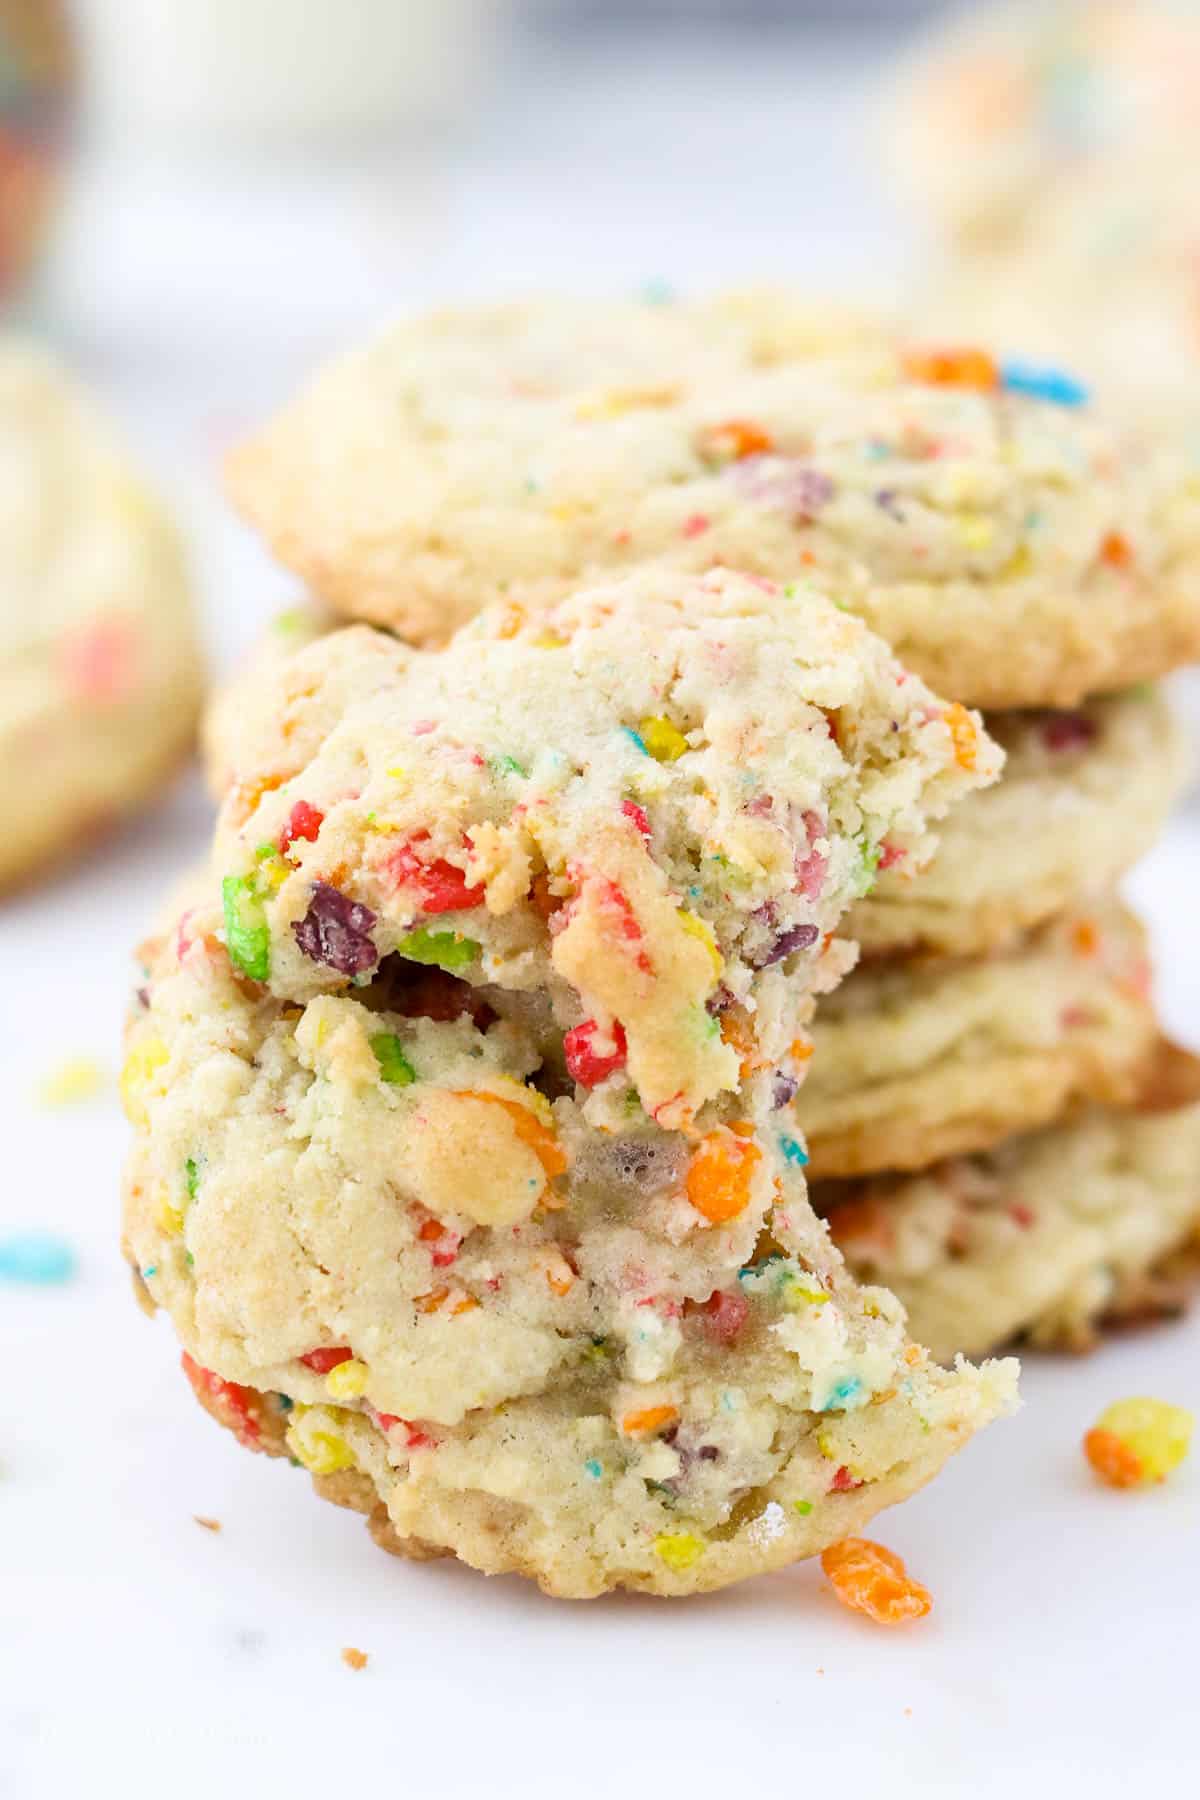 A half eaten fruity pebble cookie leaning up against others